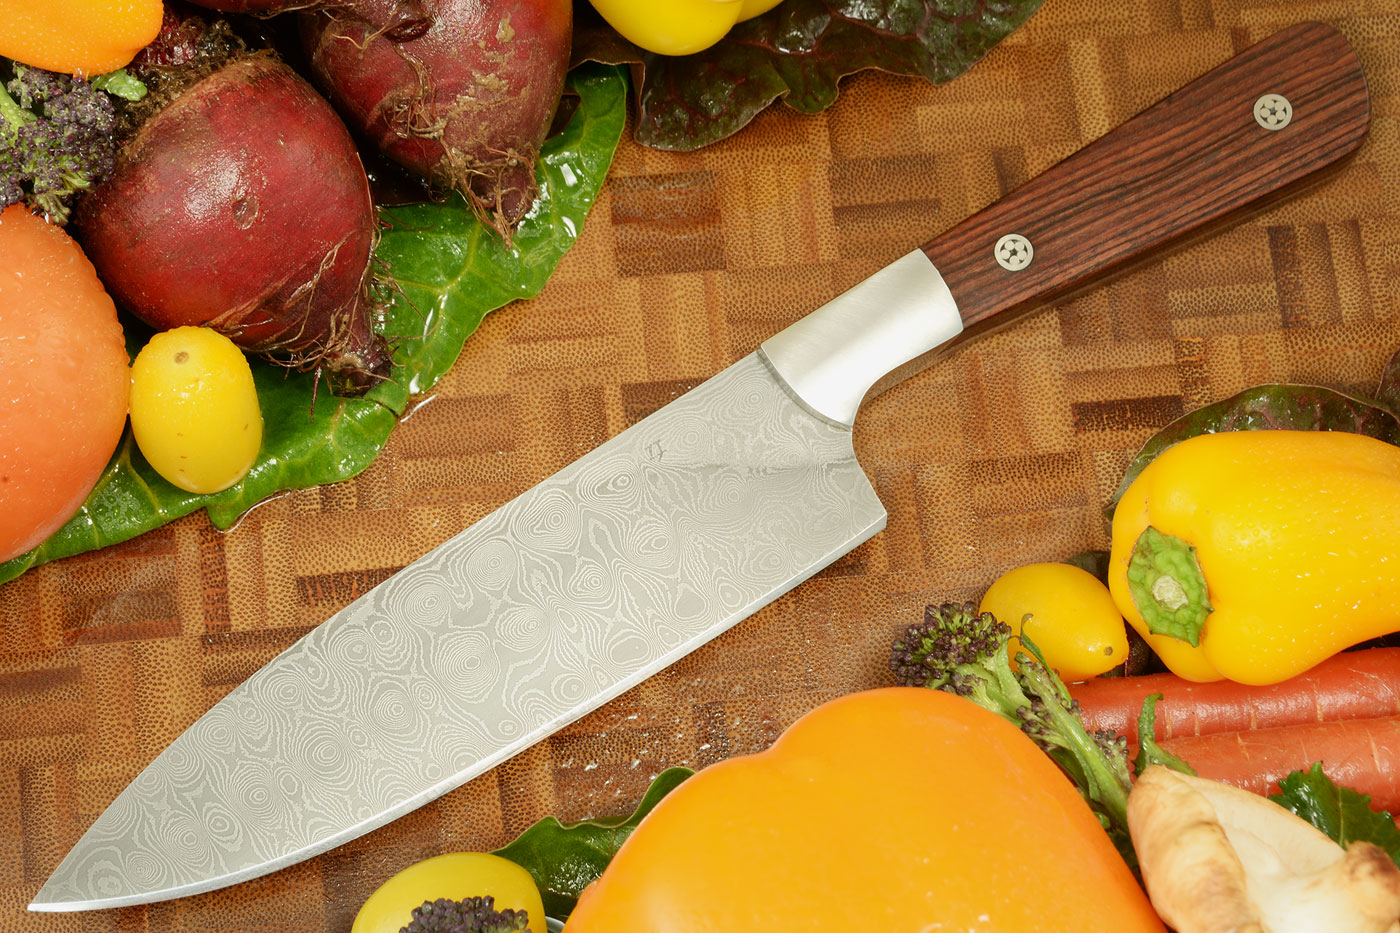 Damascus Chef's Knife (6 in.) with Kingwood